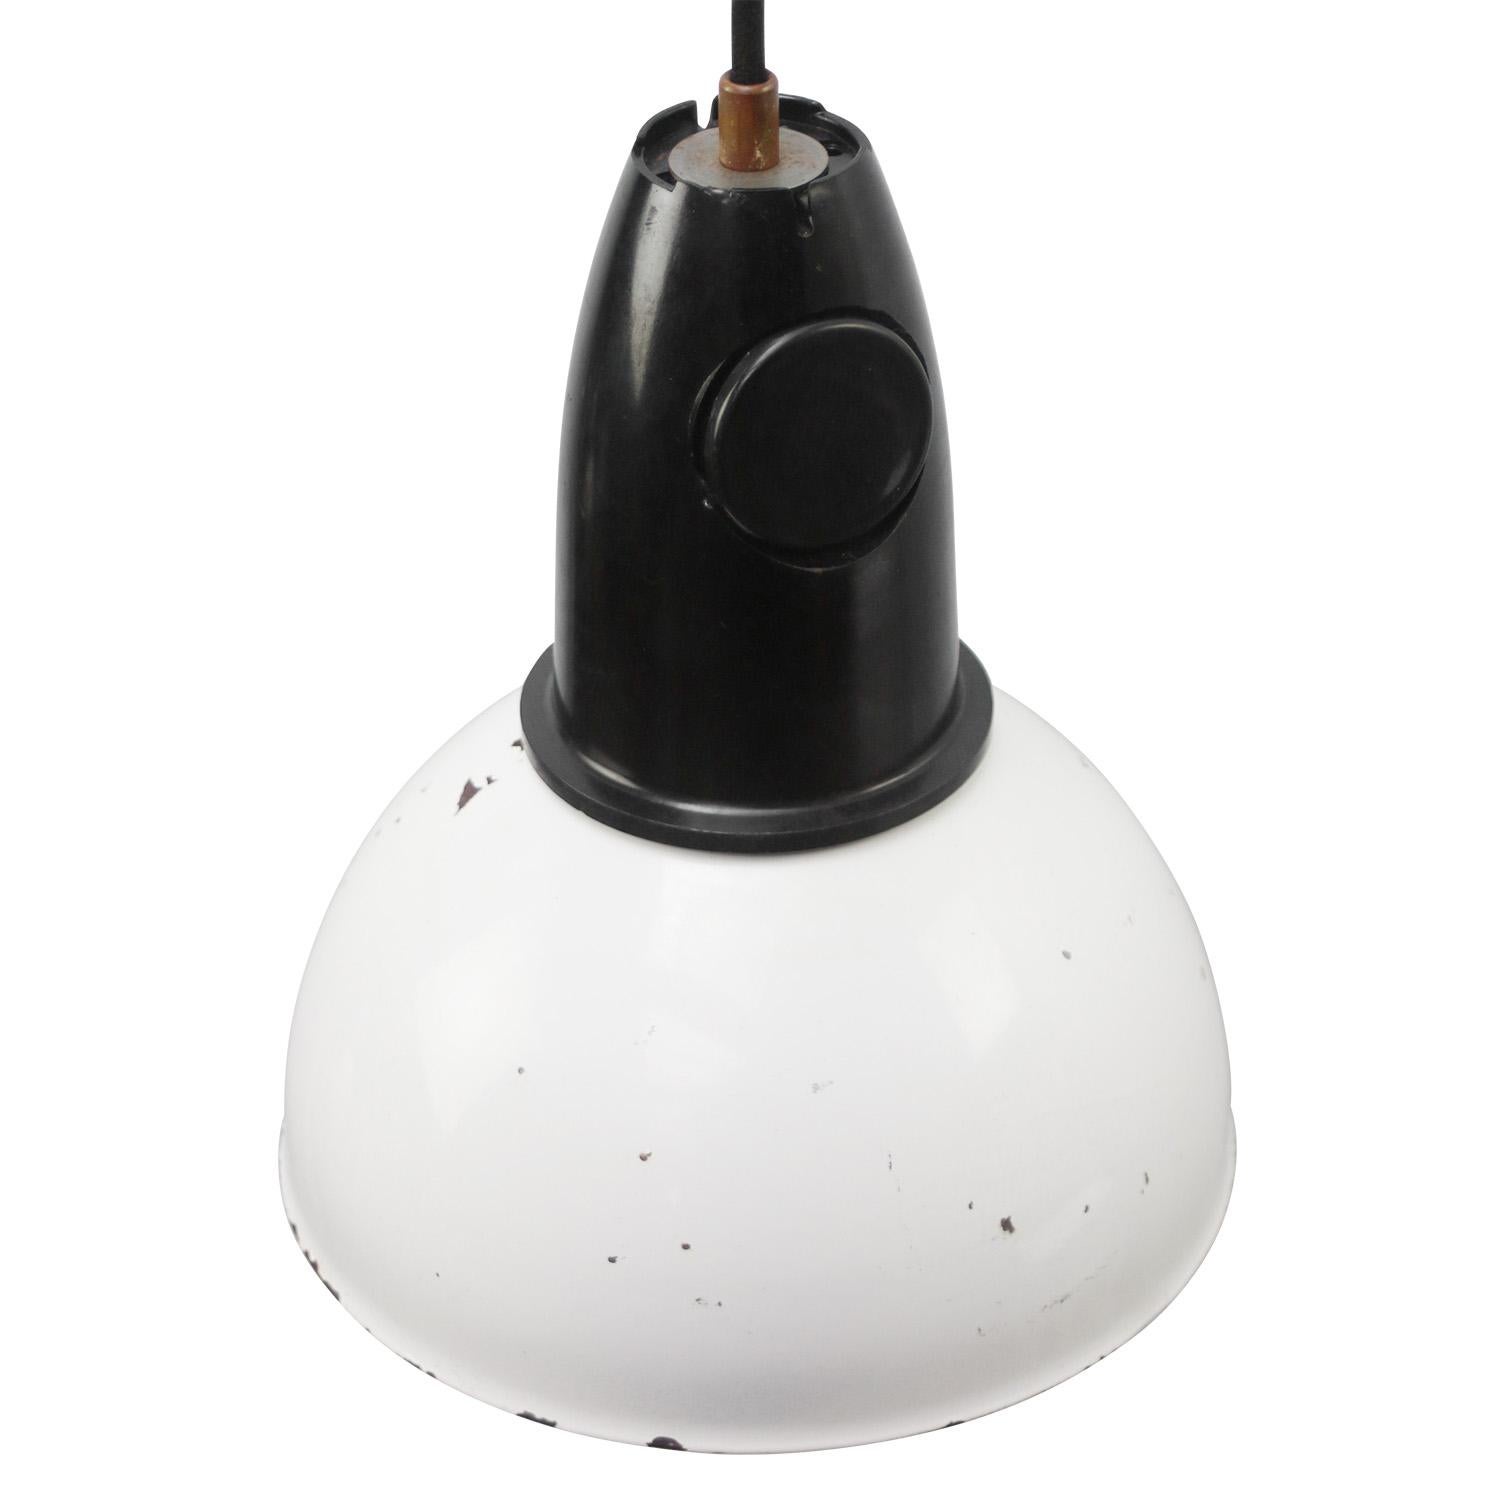 Rare industrial lamp made of white enamel with Bakelite top. 

Weight: 1.2 kg / 2.6 lb

Priced per individual item. All lamps have been made suitable by international standards for incandescent light bulbs, energy-efficient and LED bulbs. E26/E27